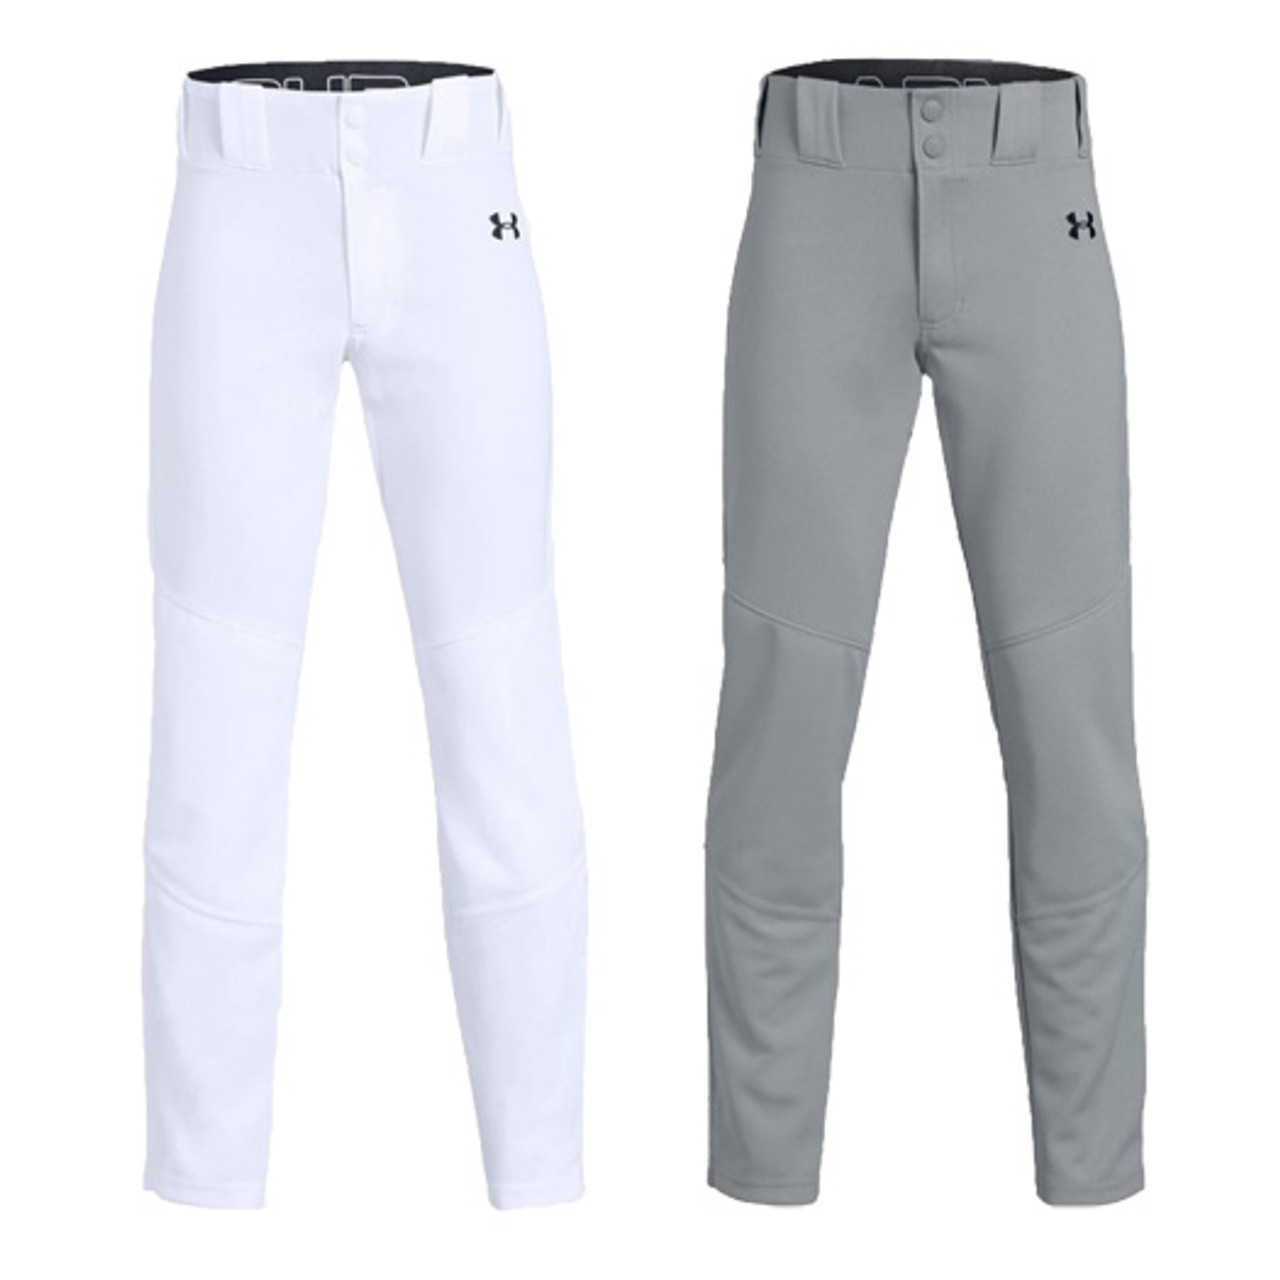 Under Armour Ace Relaxed Solid Youth Baseball Pants 1320227 - Bases Loaded